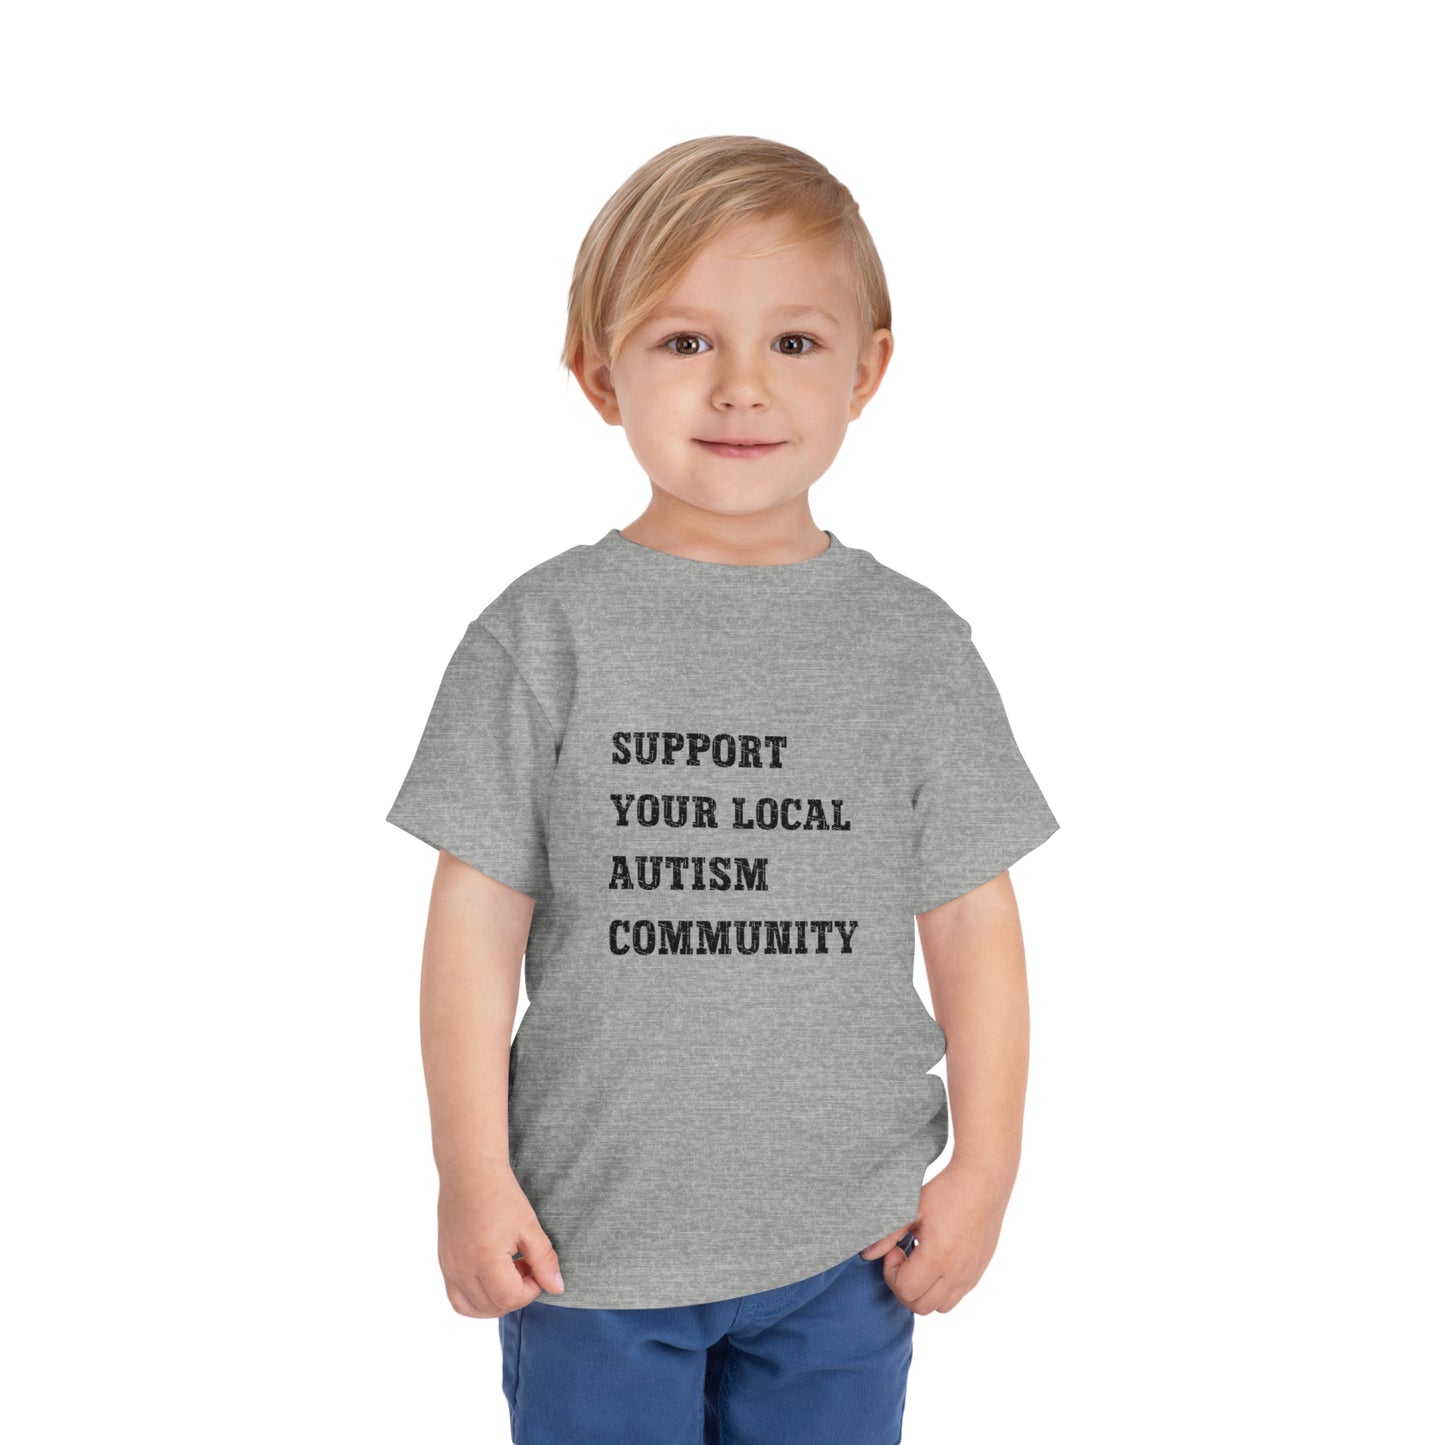 Support Your Local Autism Community Toddler Short Sleeve Tee